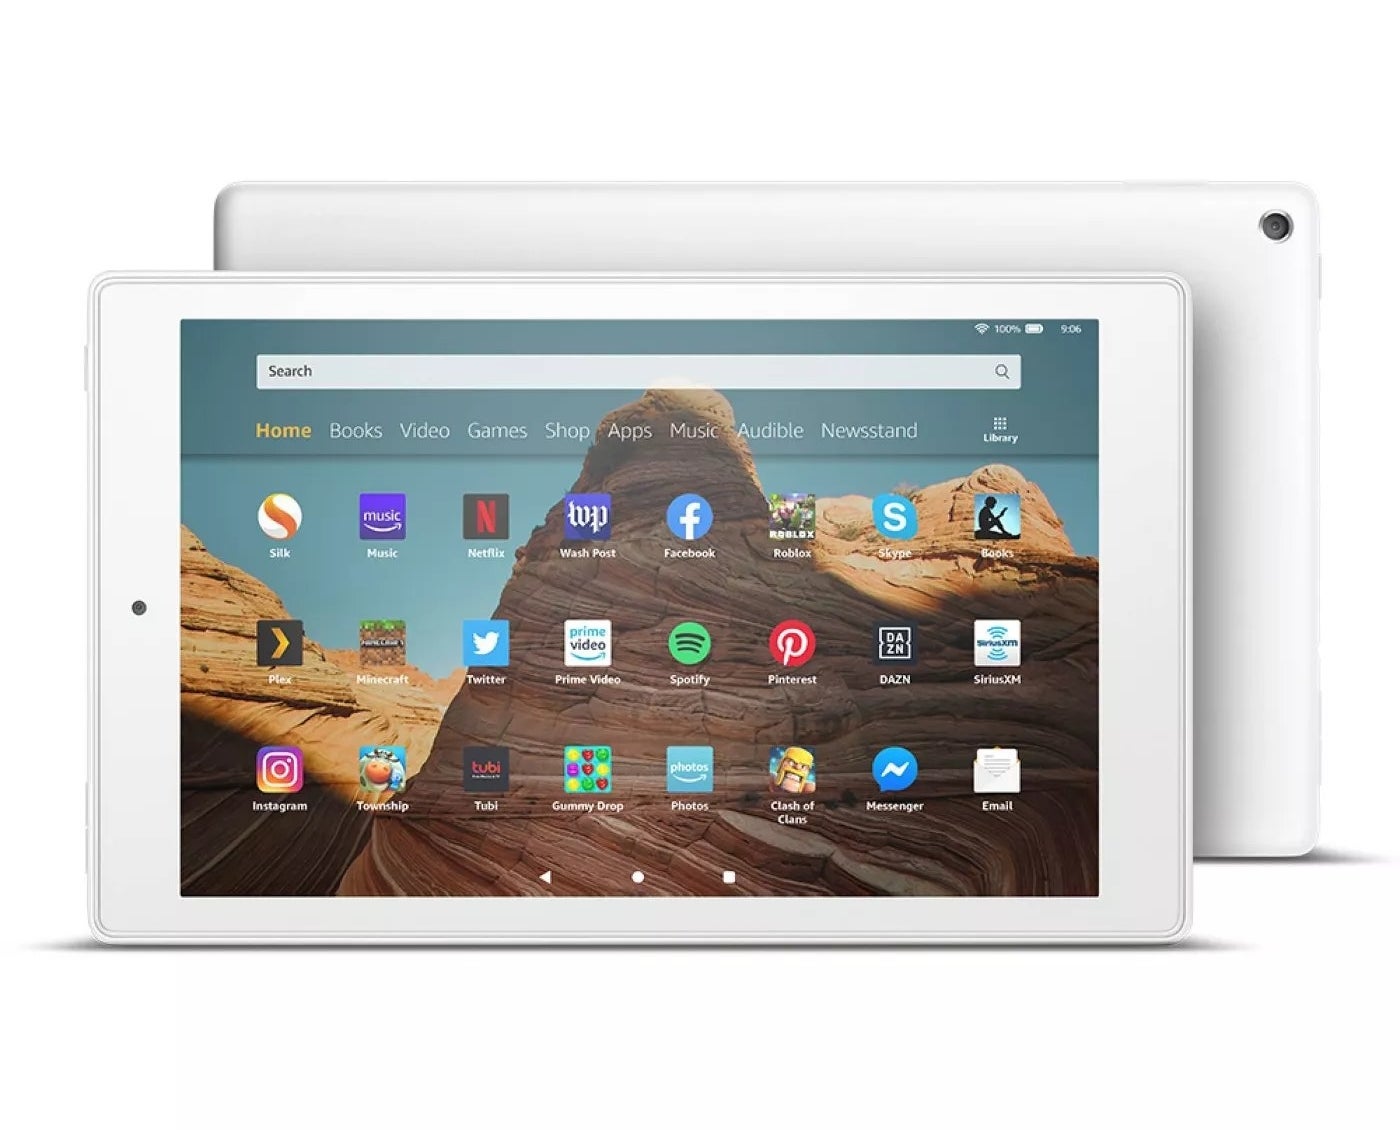 The Amazon Fire tablet in white